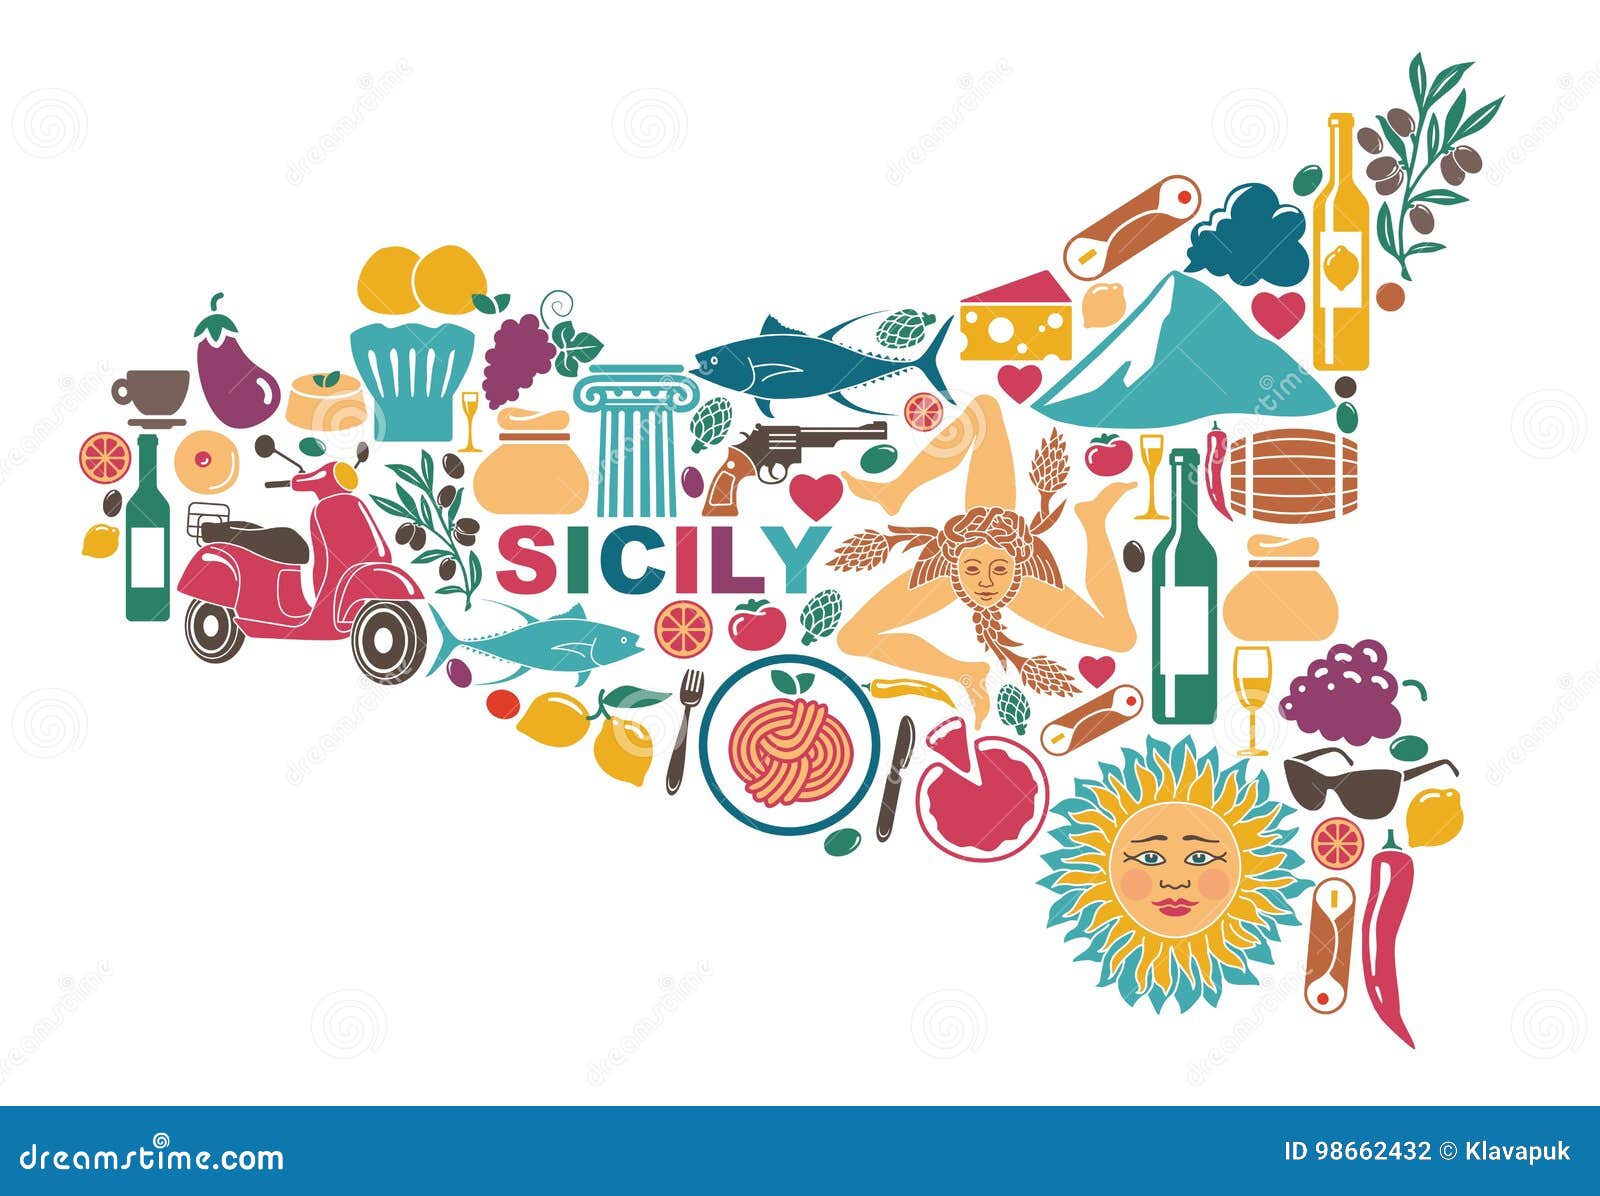 stylized map of sicily with traditional s